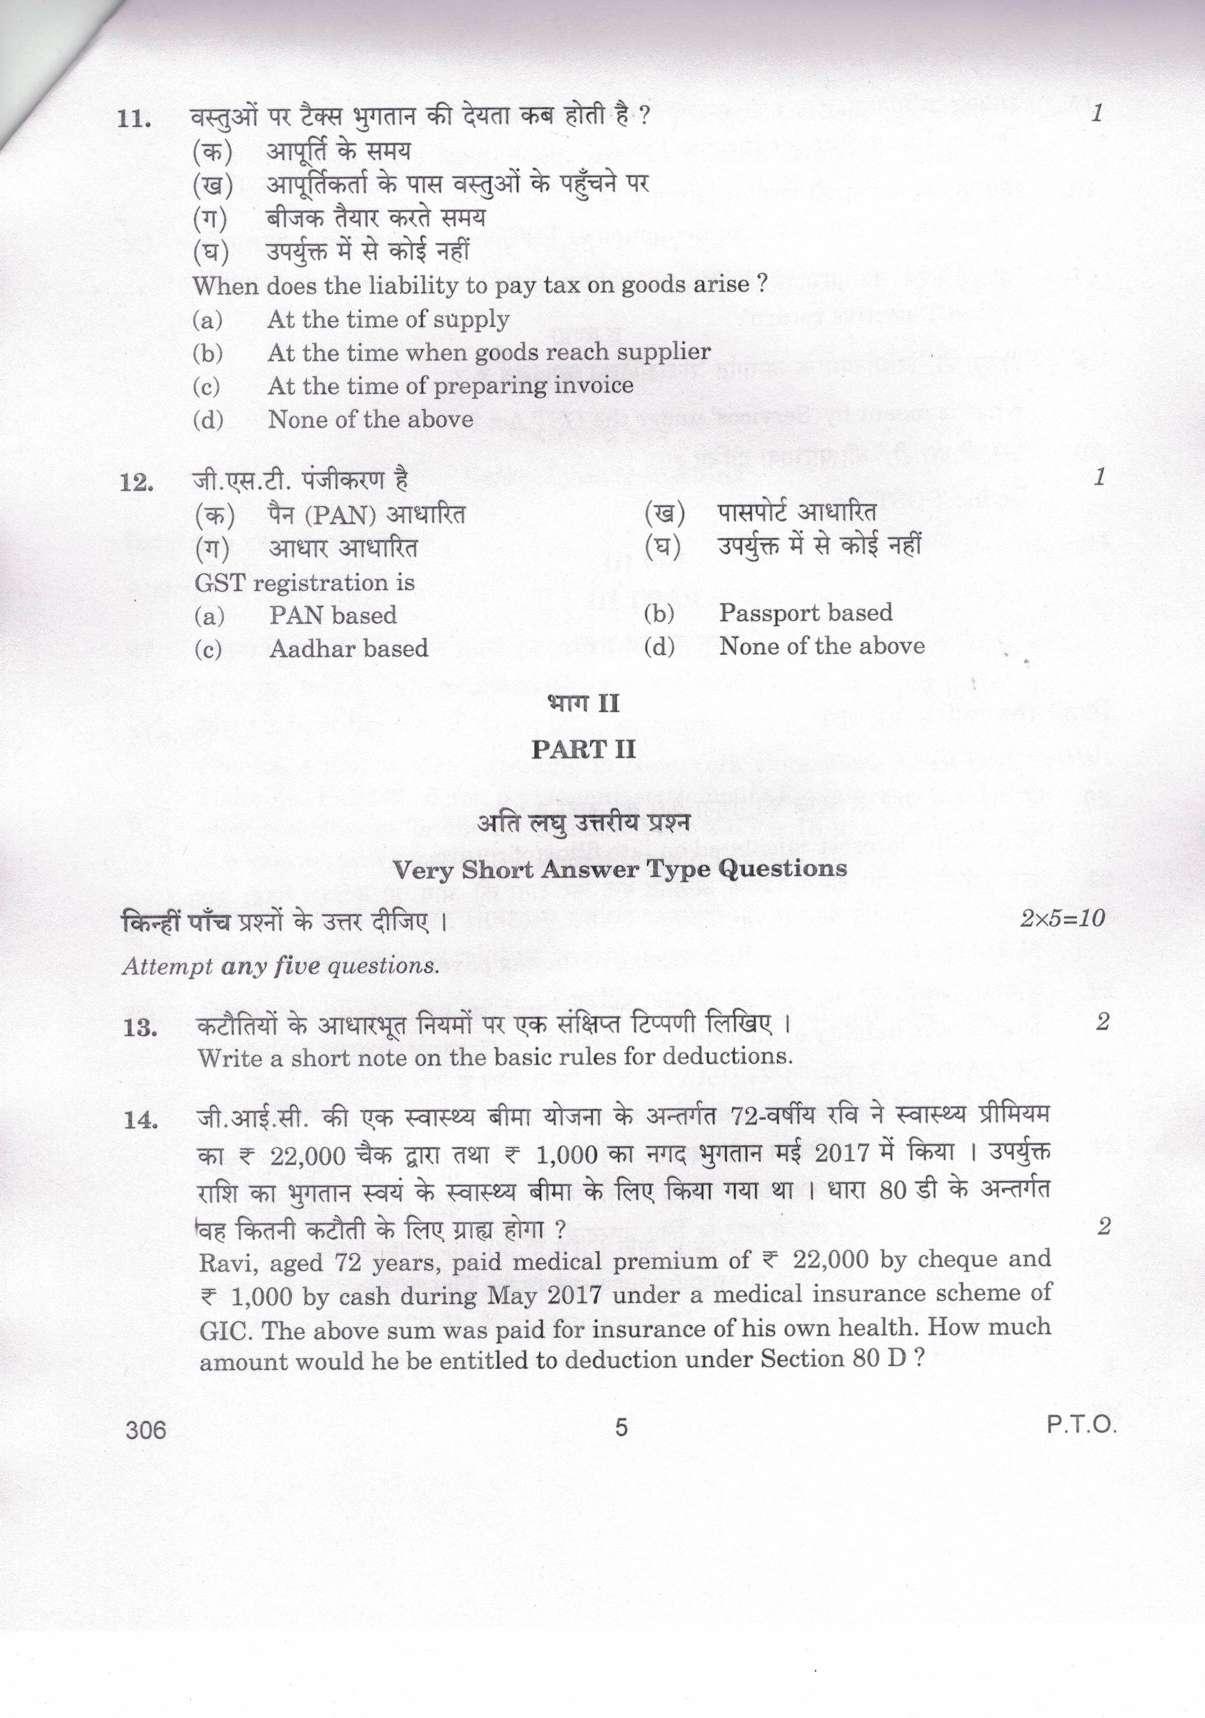 CBSE Class 12 306 Taxation_compressed 2019 Question Paper - Page 5